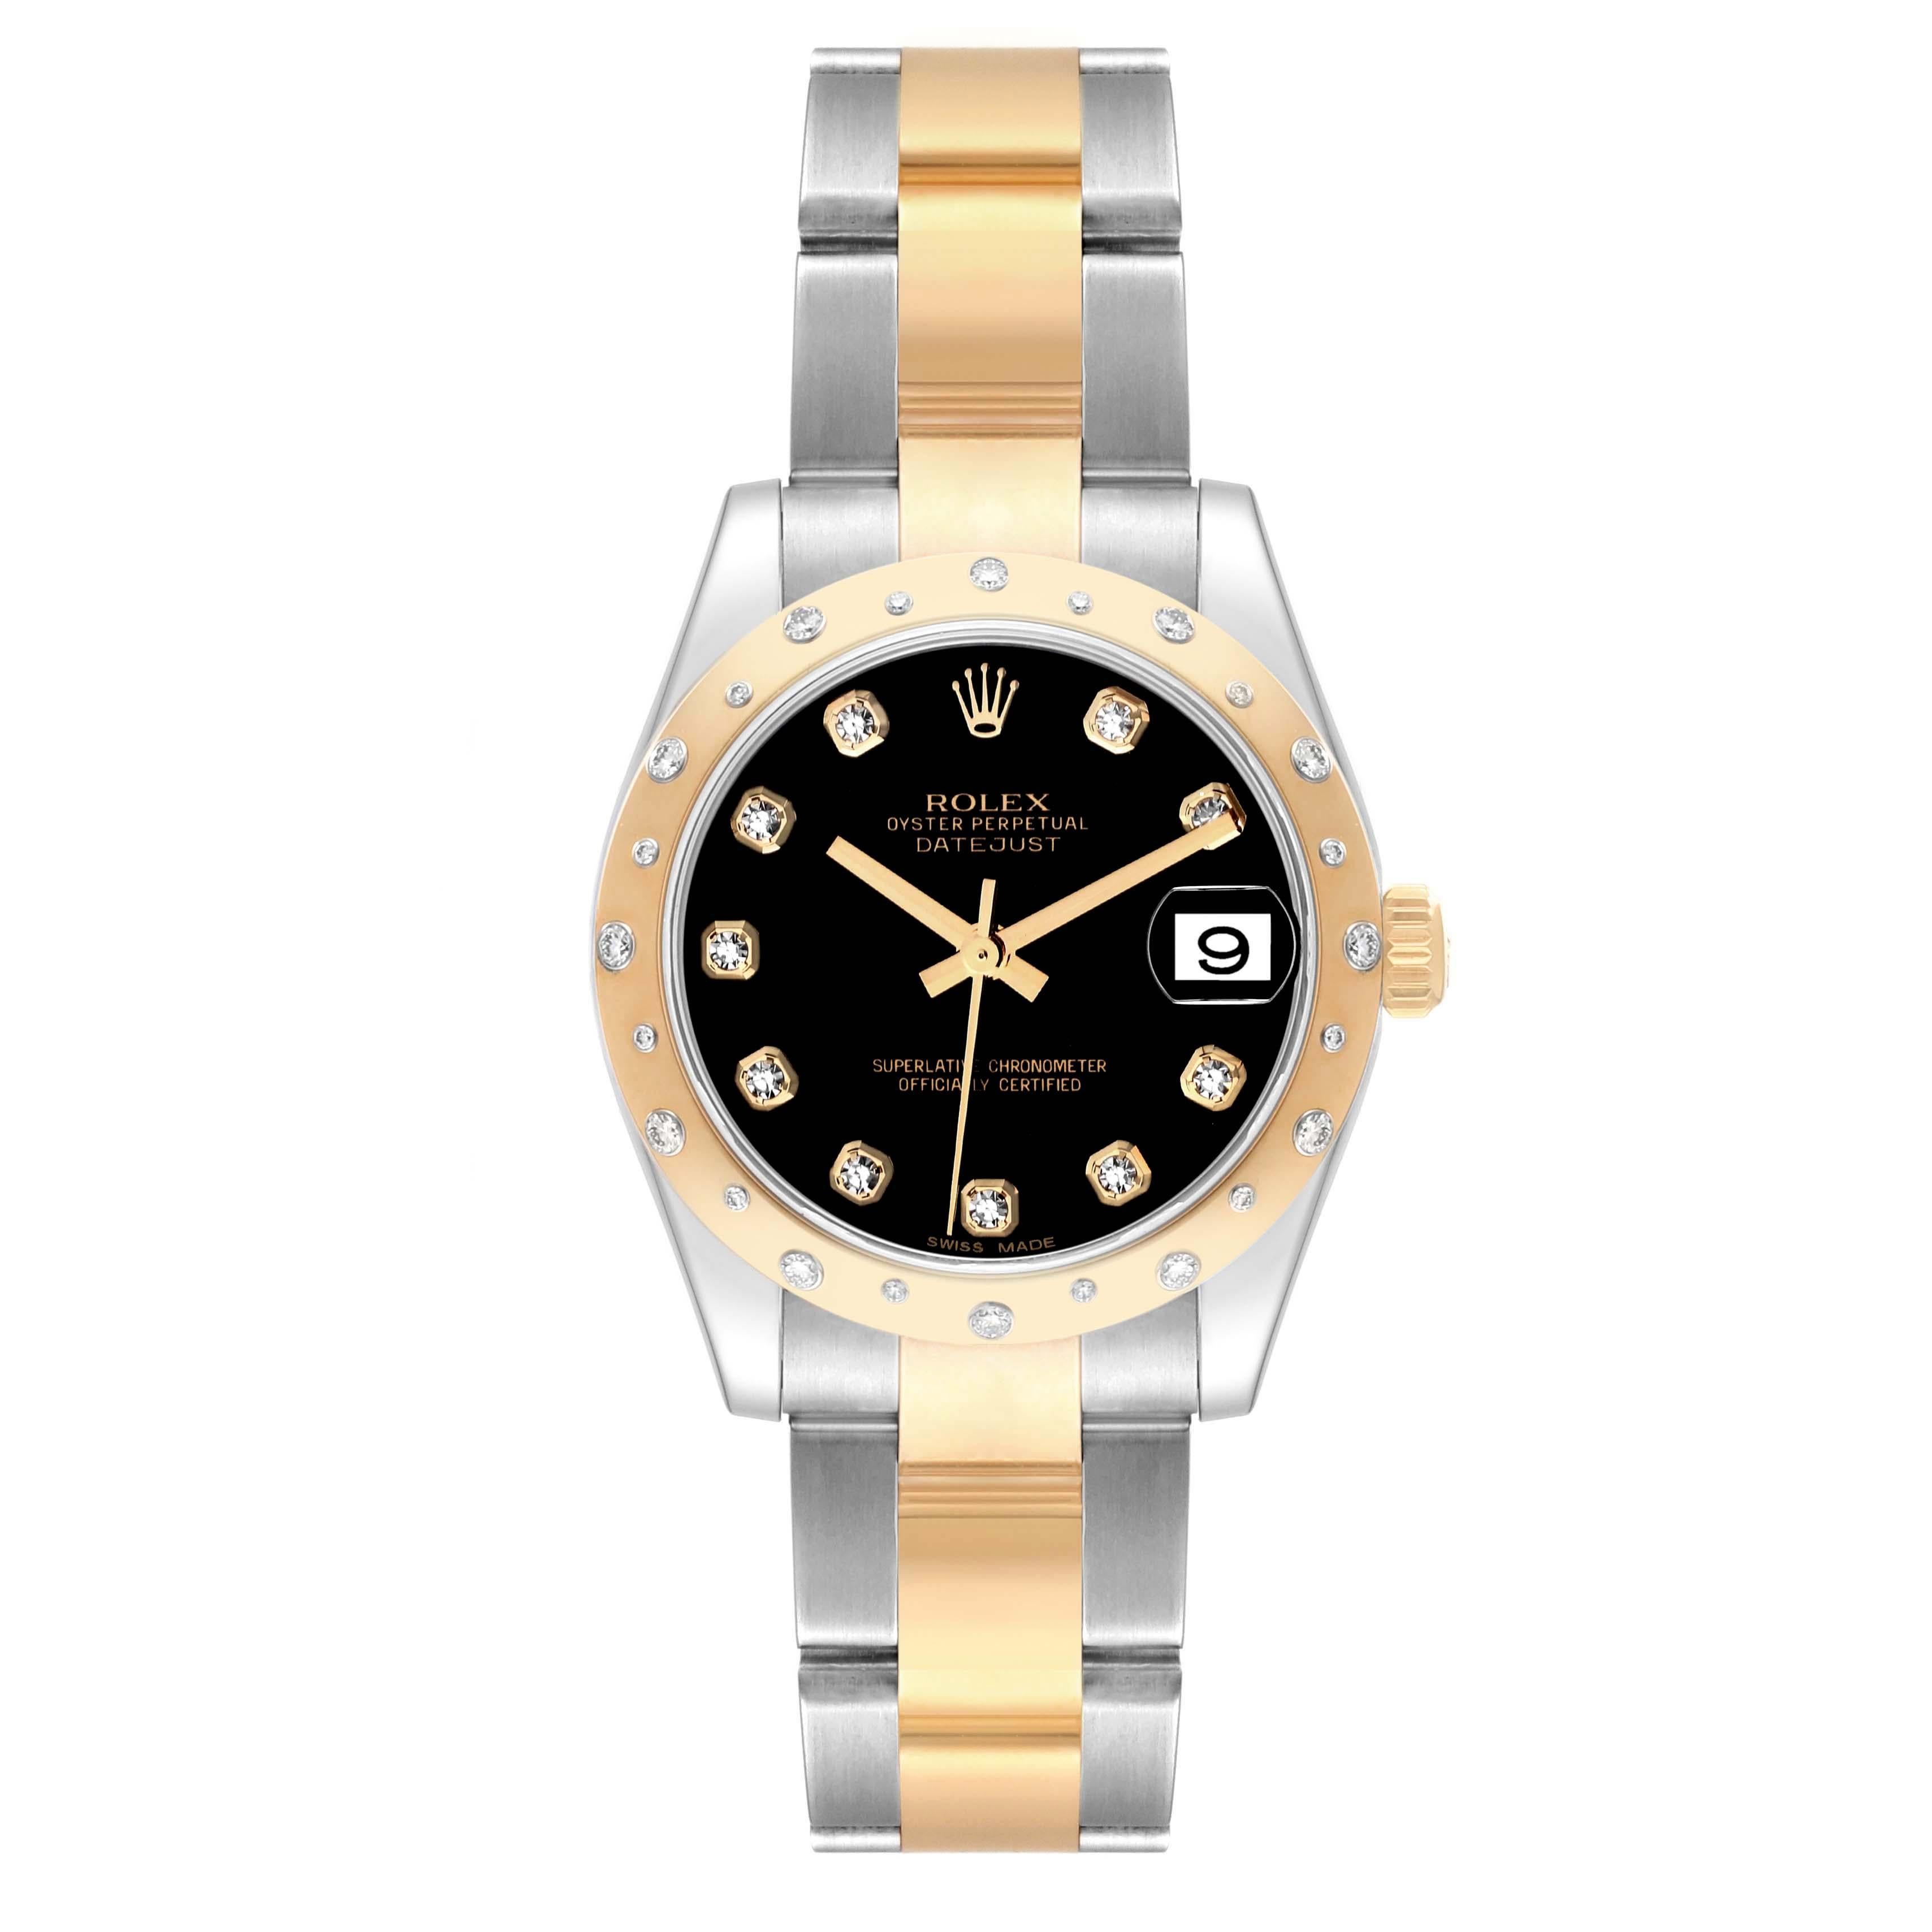 Rolex Datejust Midsize Steel Yellow Gold Diamond Ladies Watch 178343 Box Card. Officially certified chronometer automatic self-winding movement with quickset date function. Stainless steel and 18K yellow gold oyster case 31.0 mm in diameter. Rolex